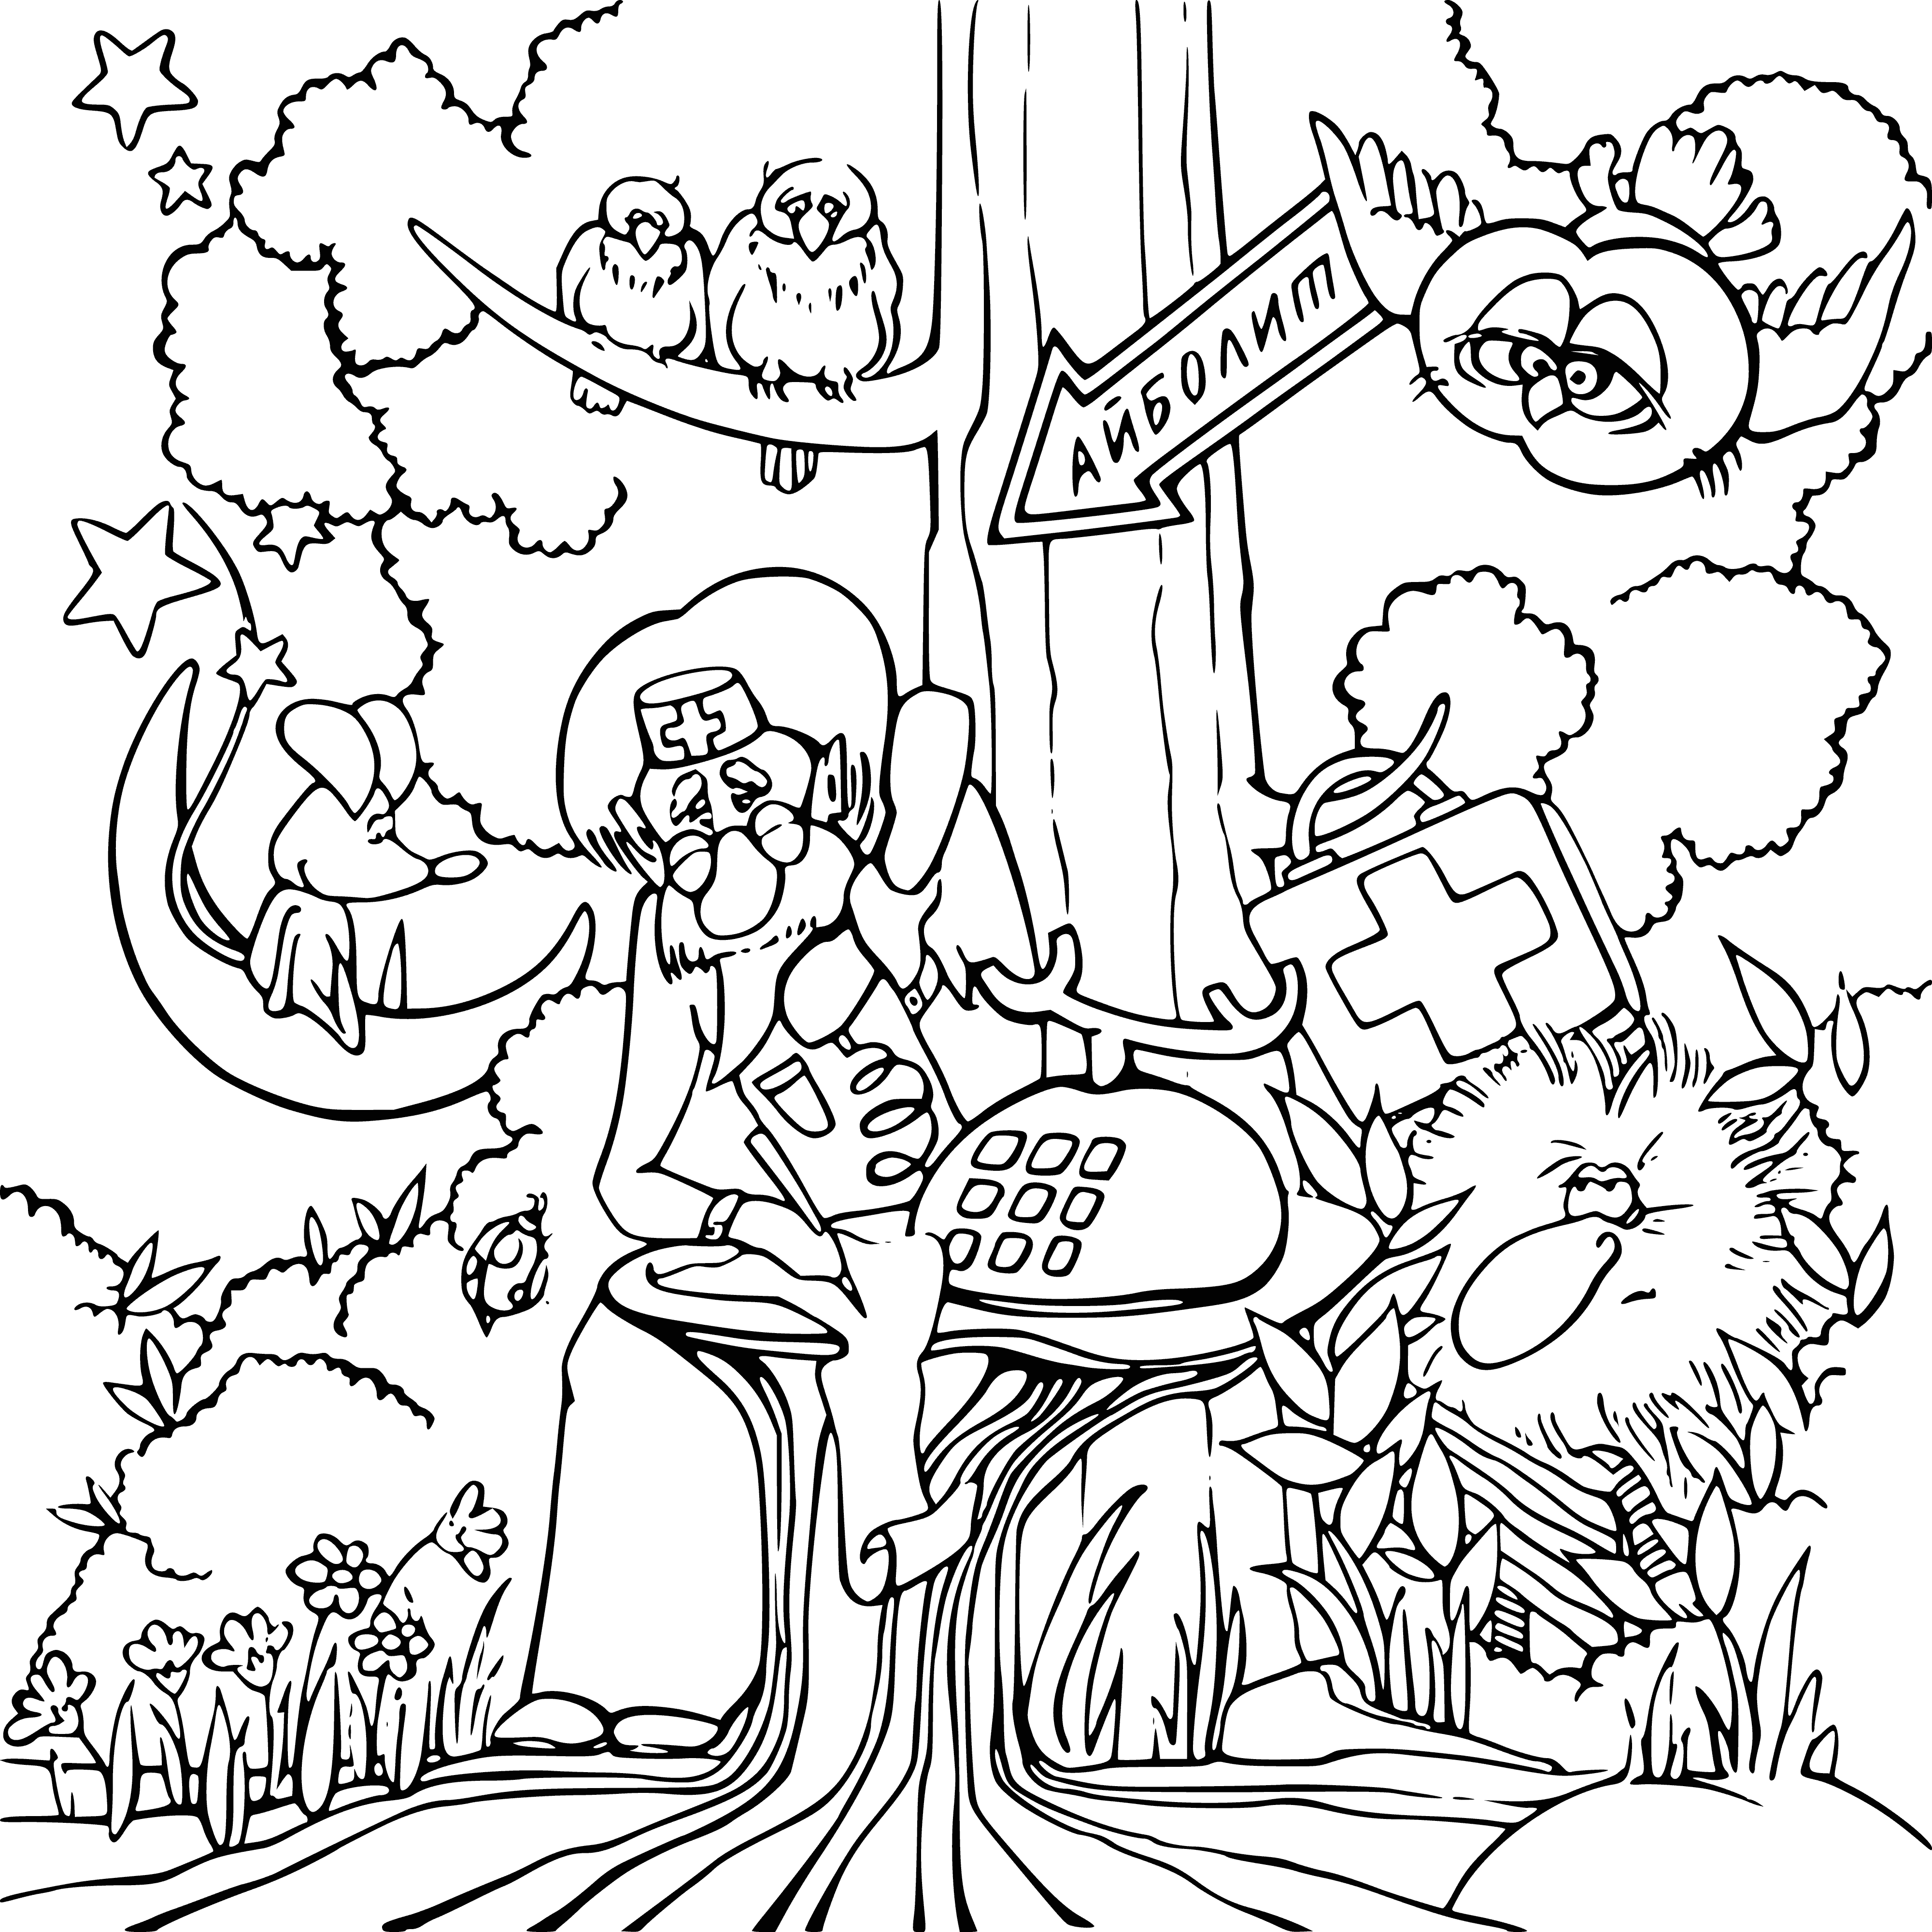 Kind doctor Aibolit coloring page